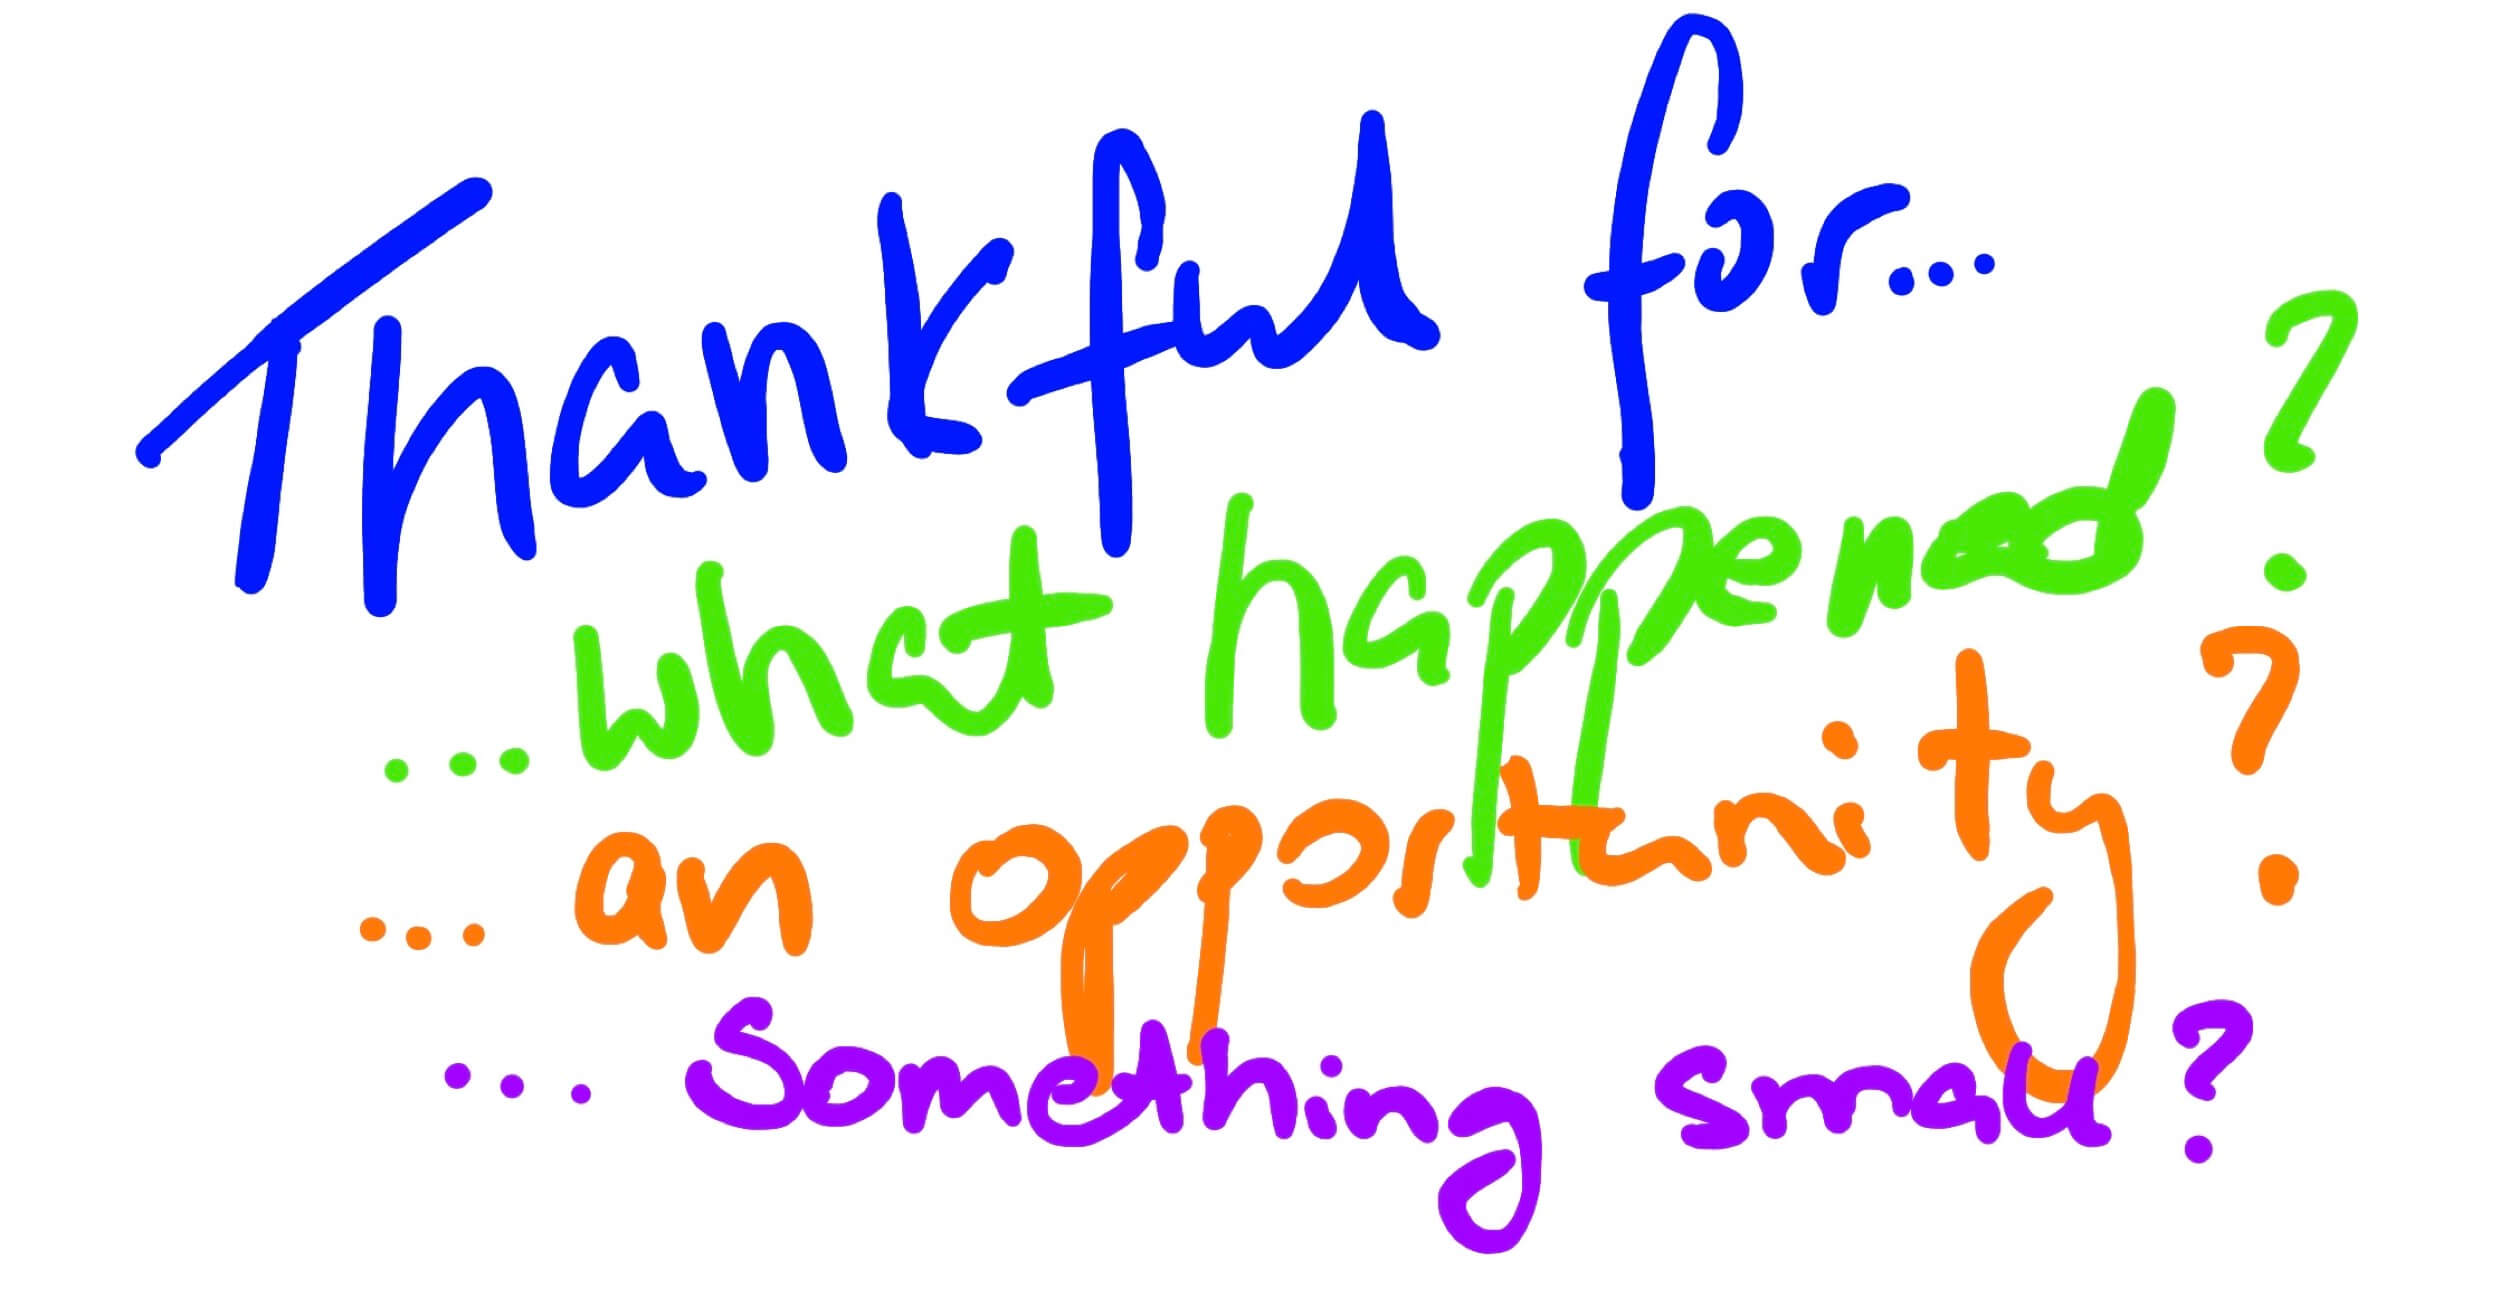 Be thankful and practice gratitude every day